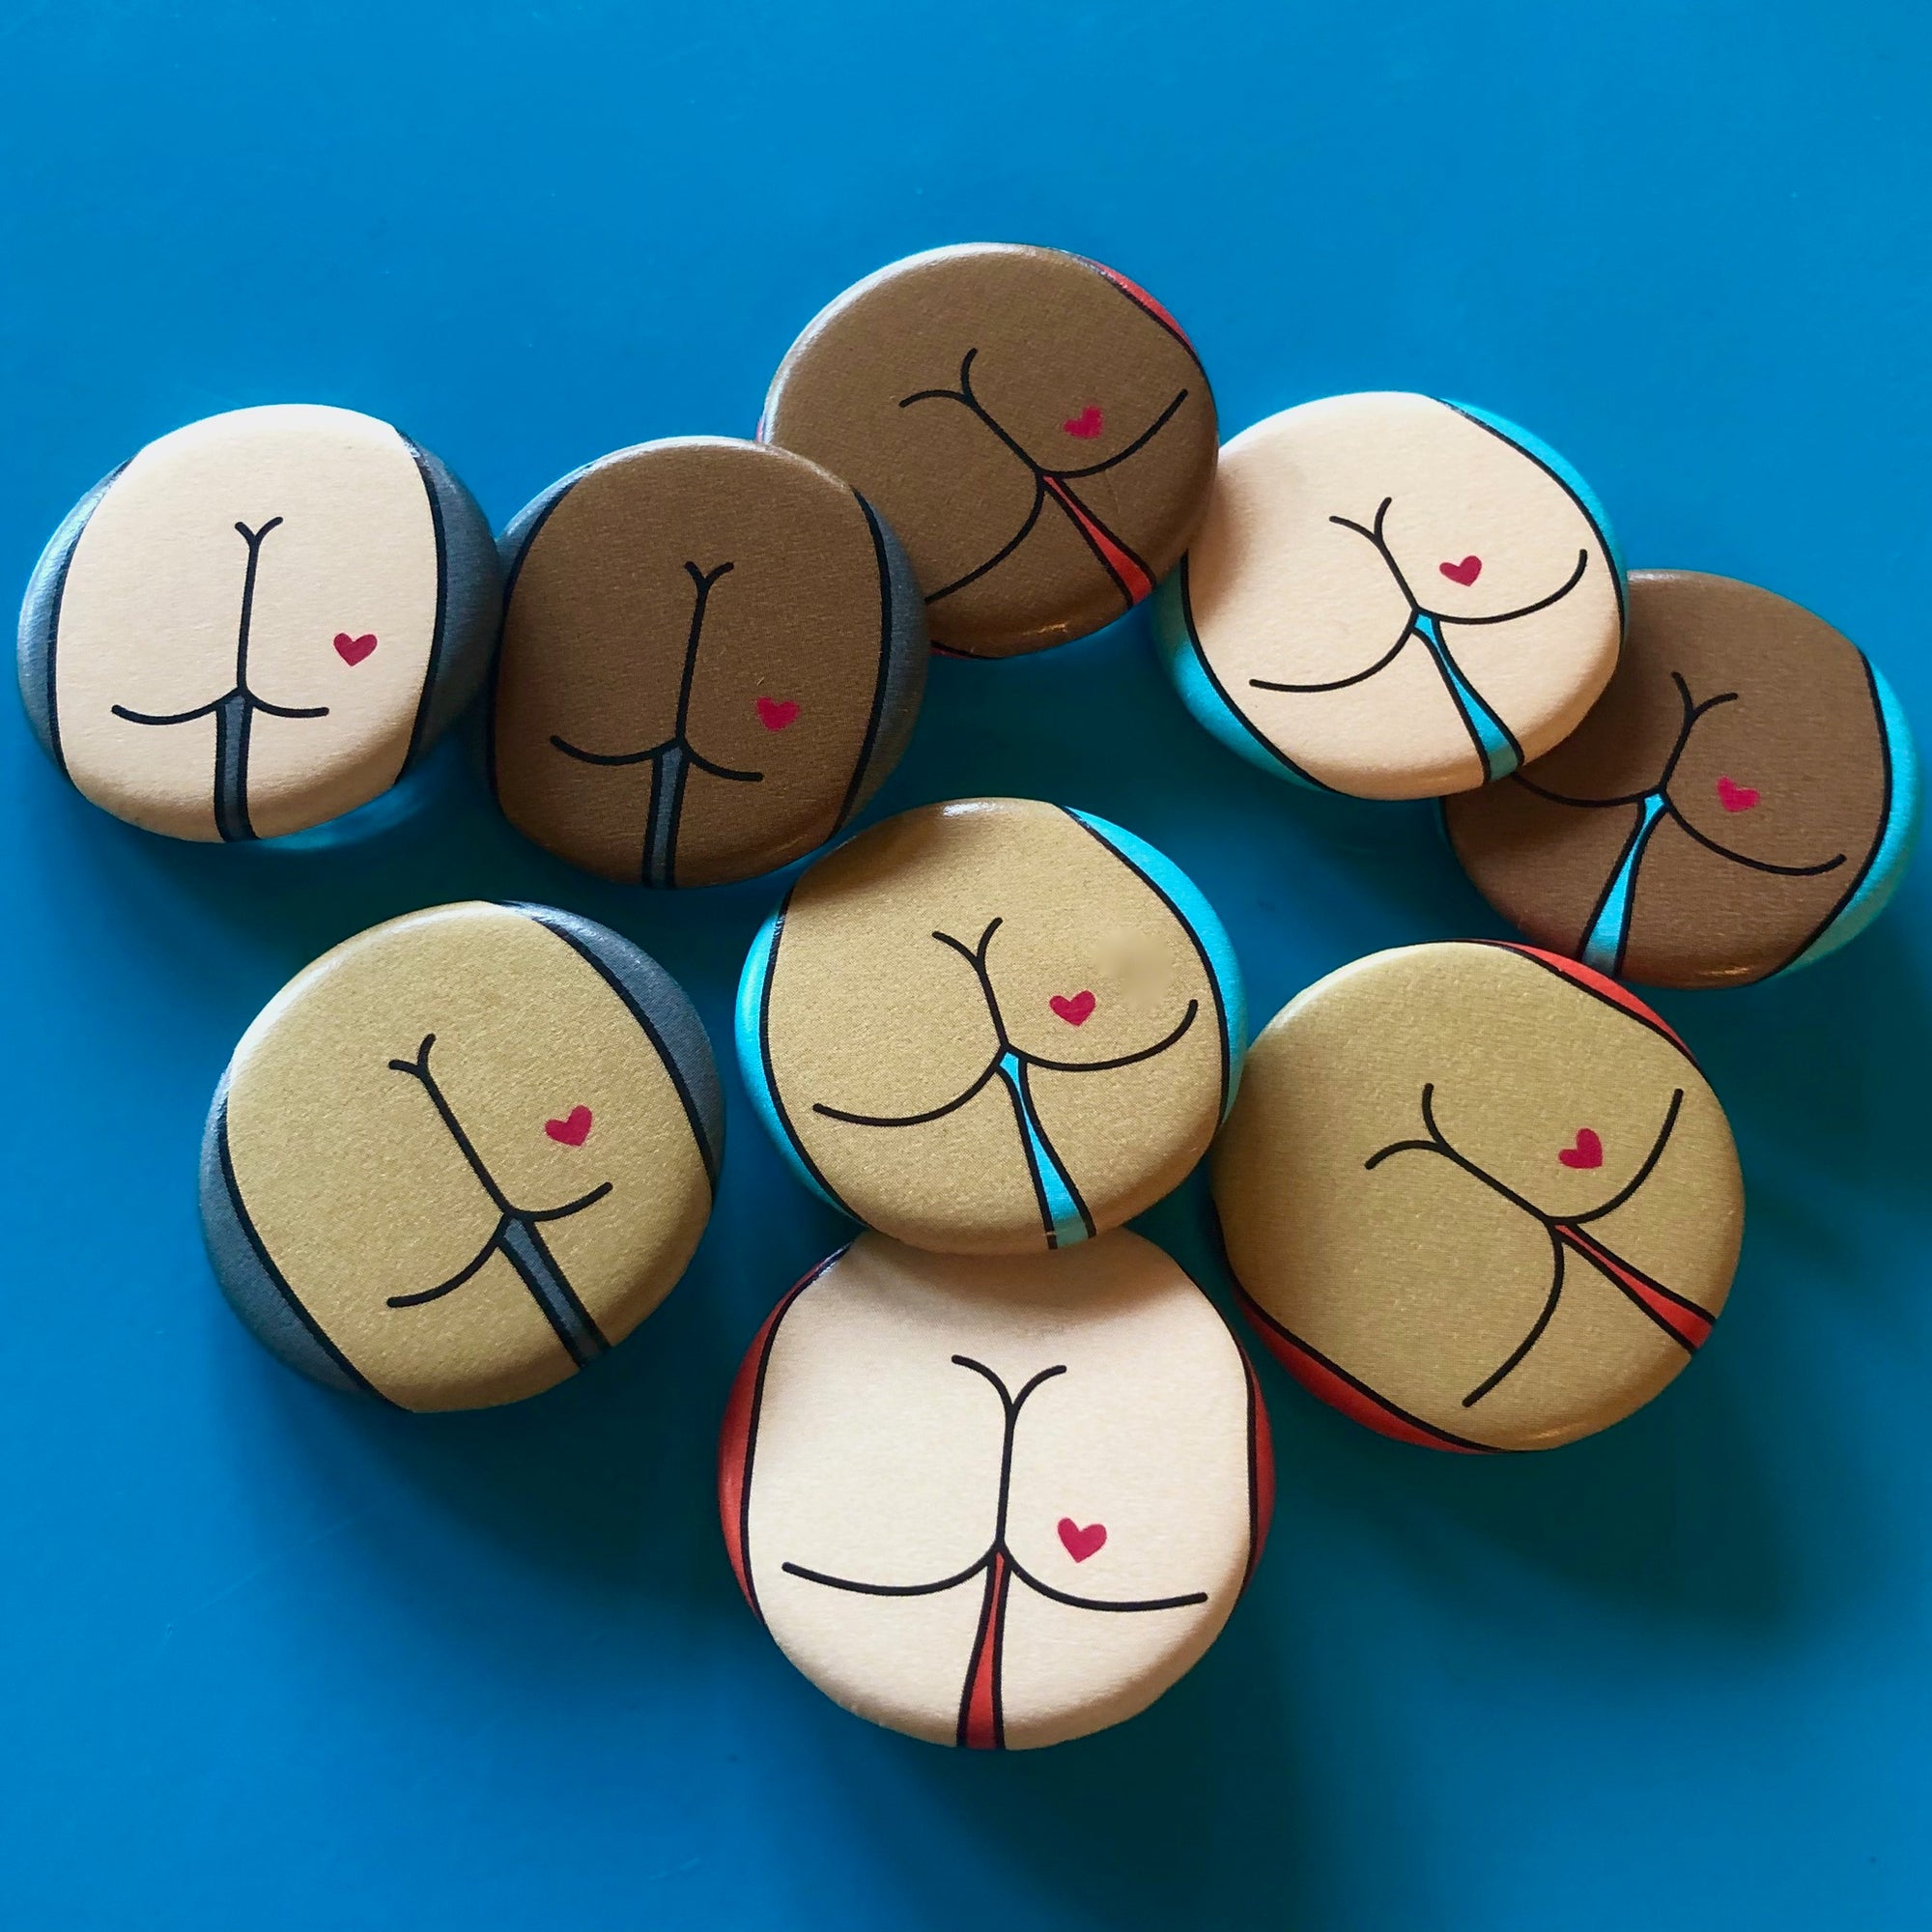 Magnet - 1.25 Inch: Butts - A Variety of Butt Shapes and Colors